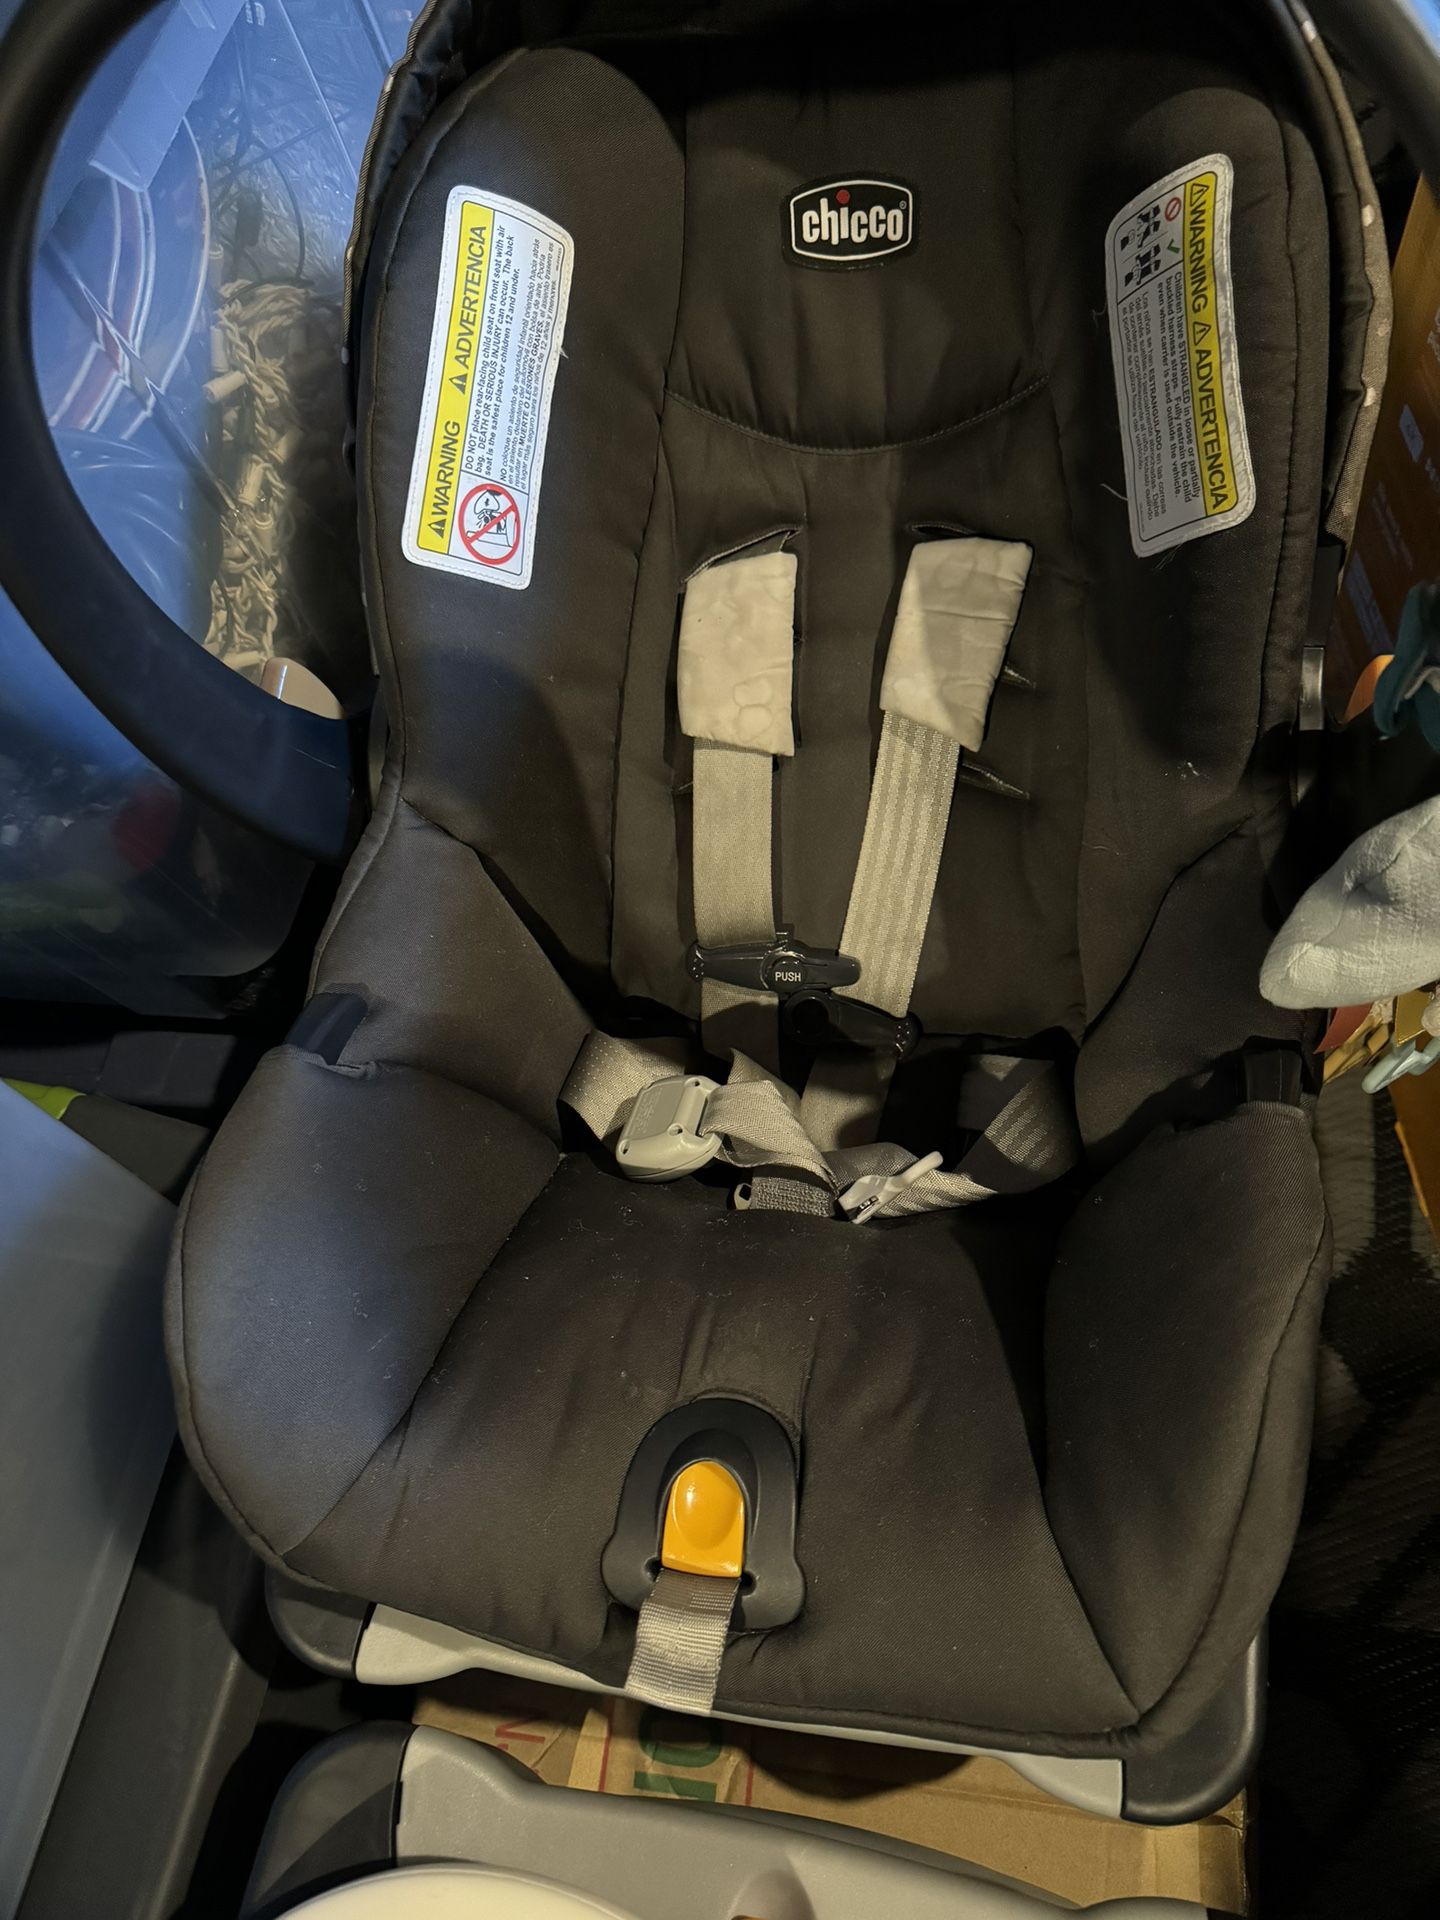 Chicco Car Seat, Two Bases, and Caddy